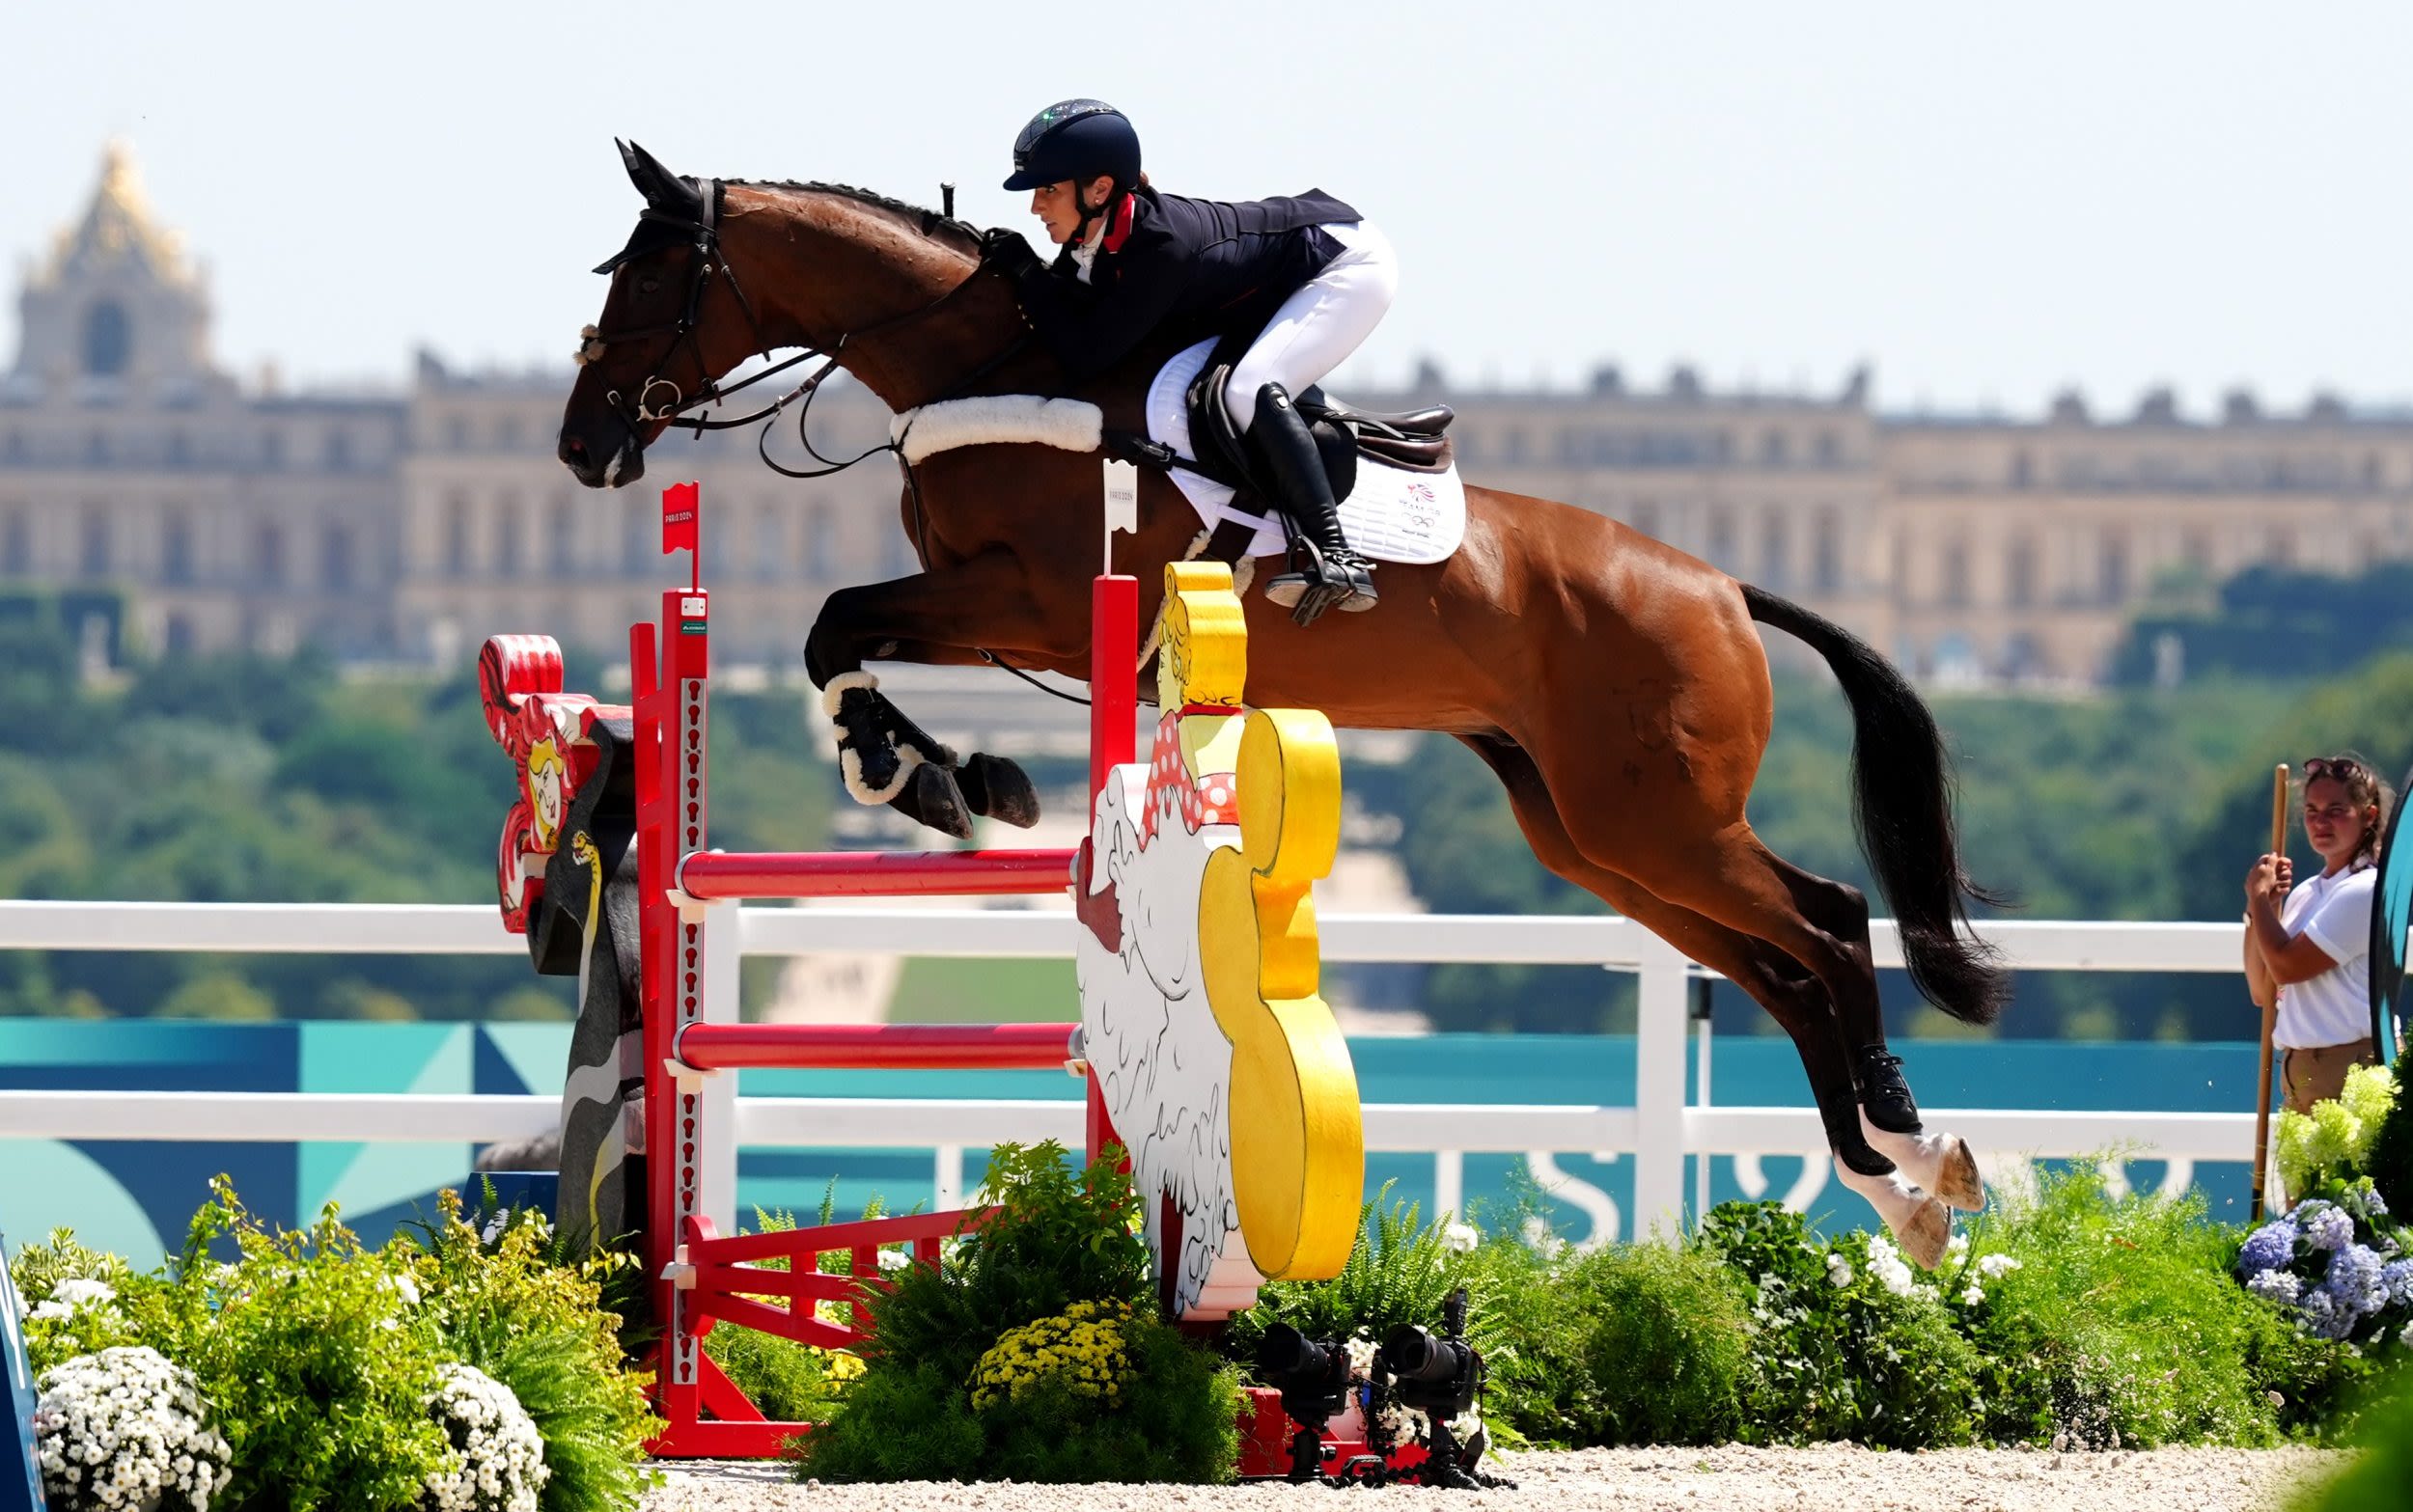 Laura Collett wins two Olympic medals in five hours to complete eventing comeback story